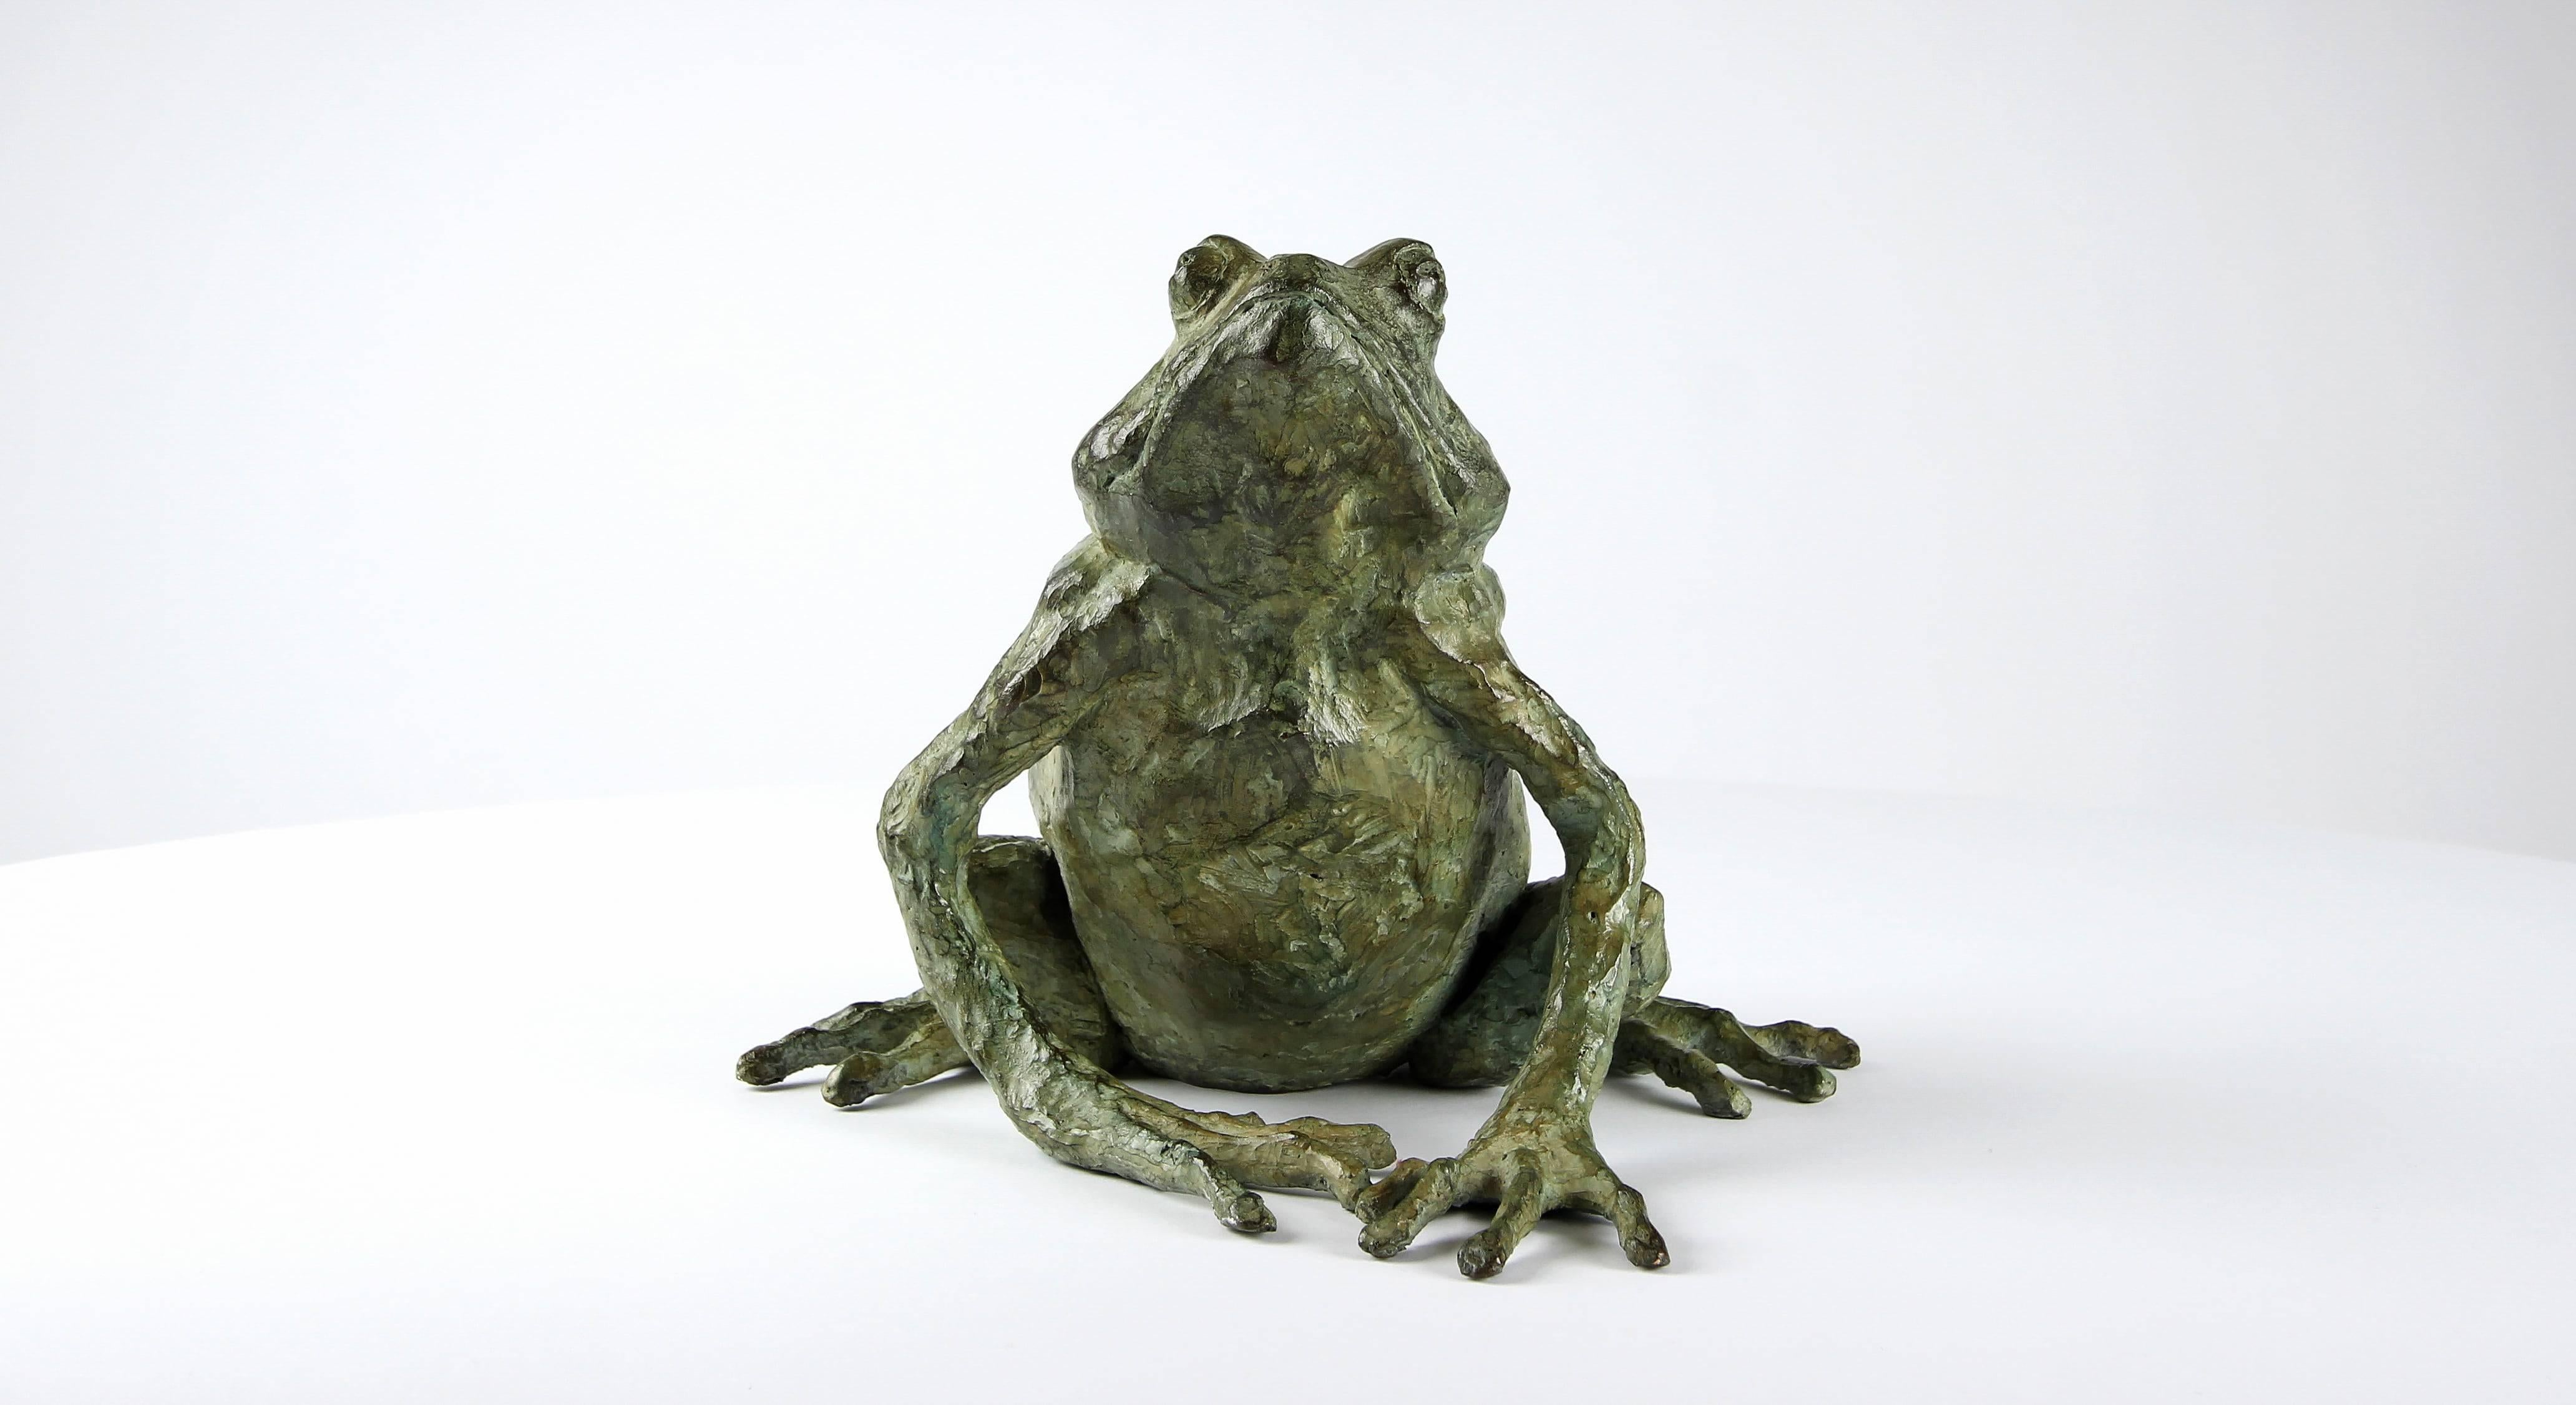 Magic Frog by Chésade - Bronze sculpture, animal art, expressionism, realism For Sale 1